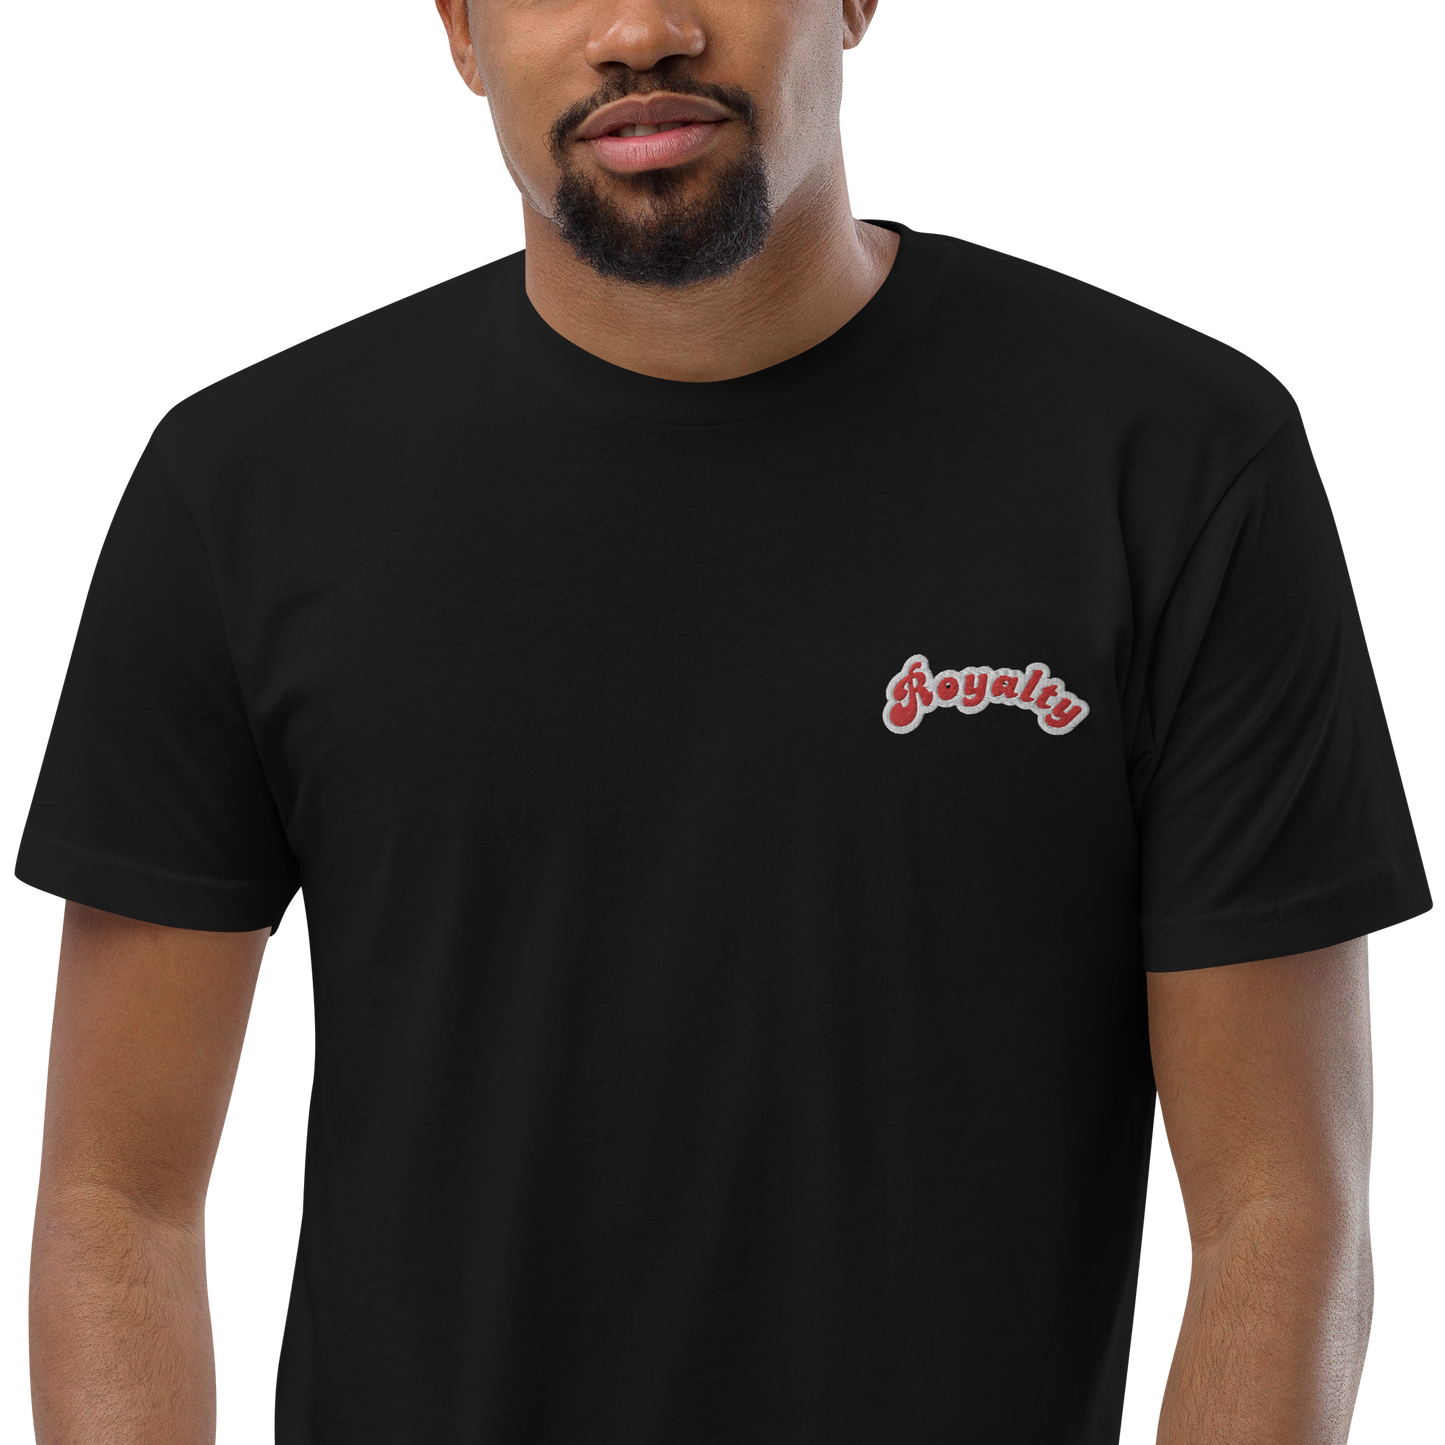 Royalty embroidered logo - Short Sleeve T-shirt